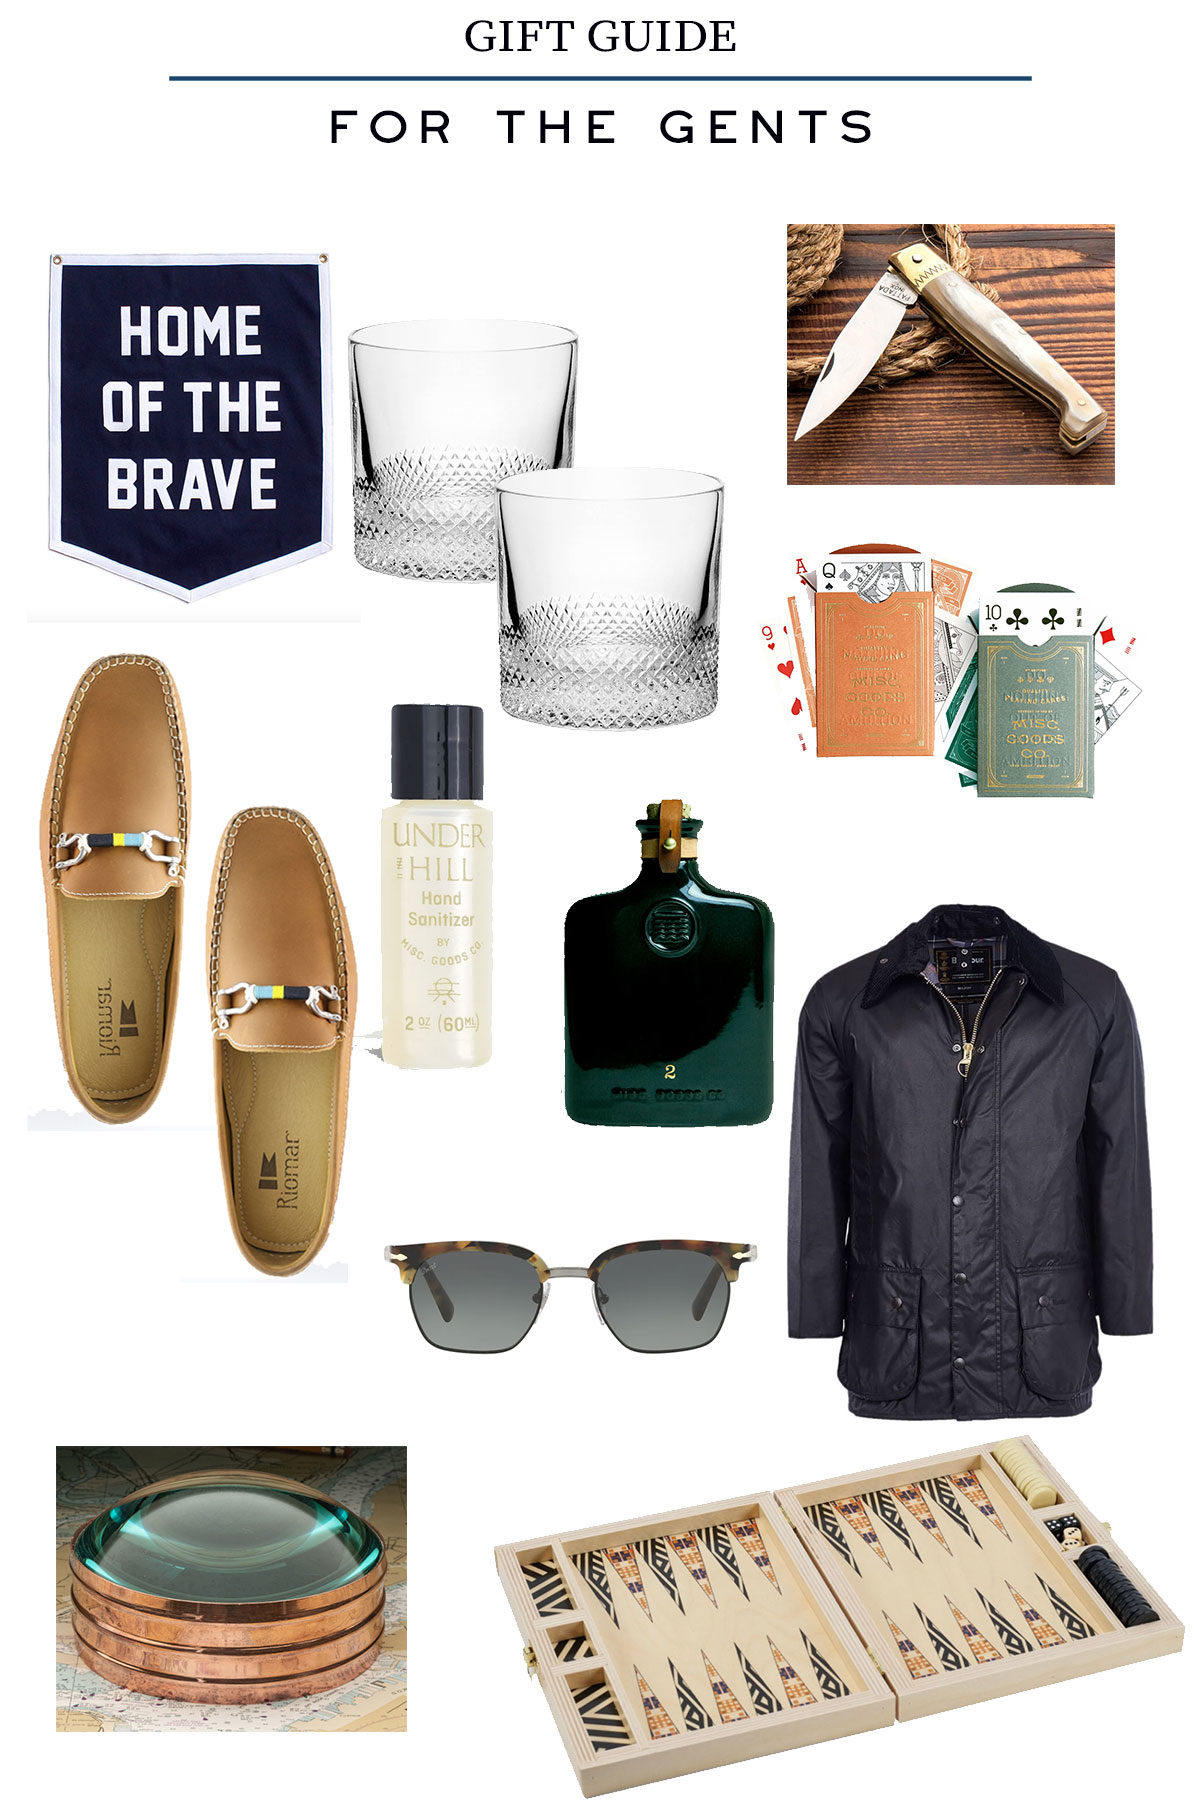 2020 Gift Guide for the Gents